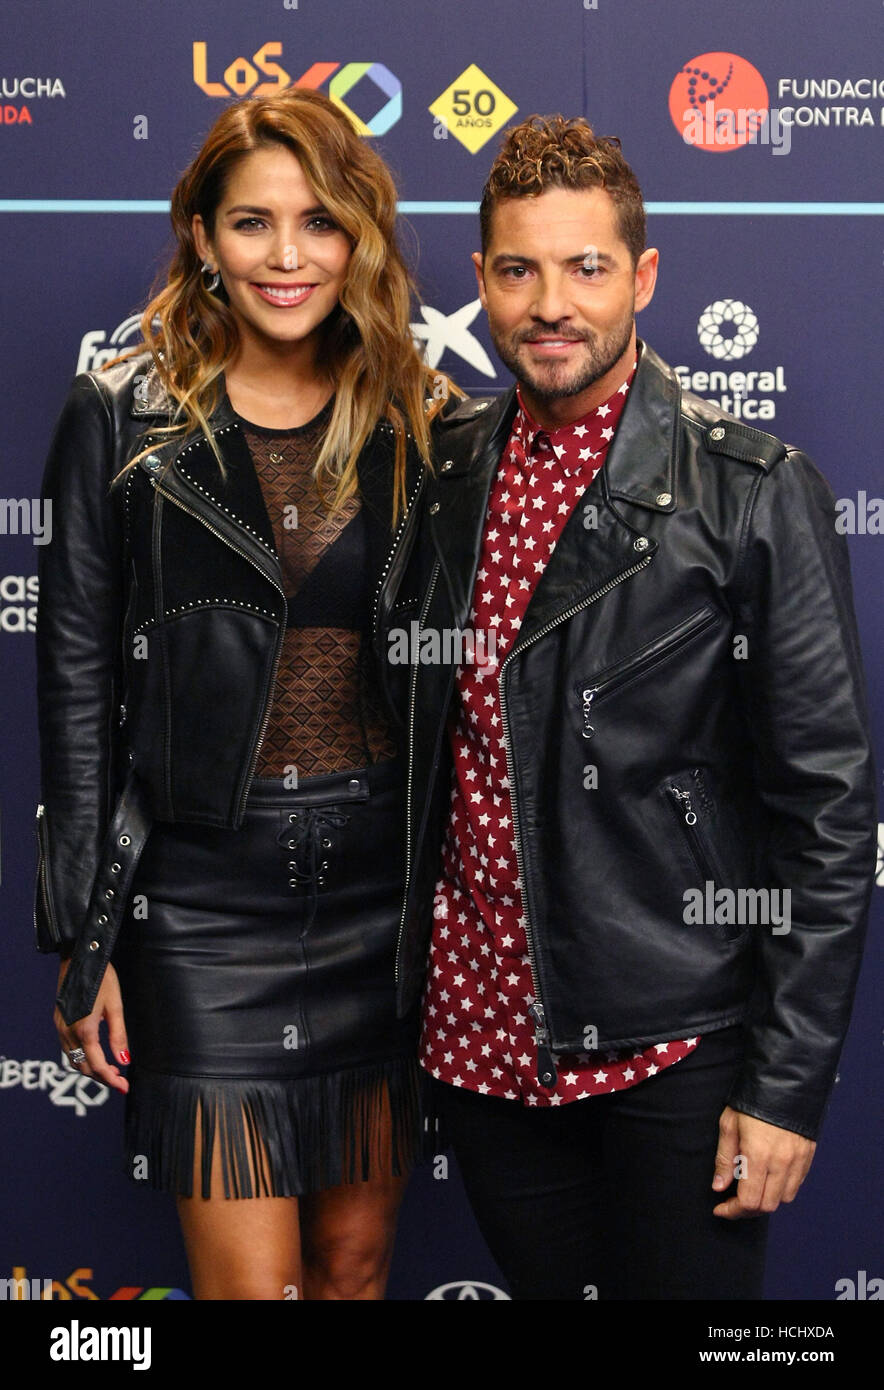 Singer David Bisbal and his girlfriend Rosanna Zanetti during the photocall of the Los 40 Music Awards in Madrid, on Friday, Thursday 1 December 2016 Stock Photo